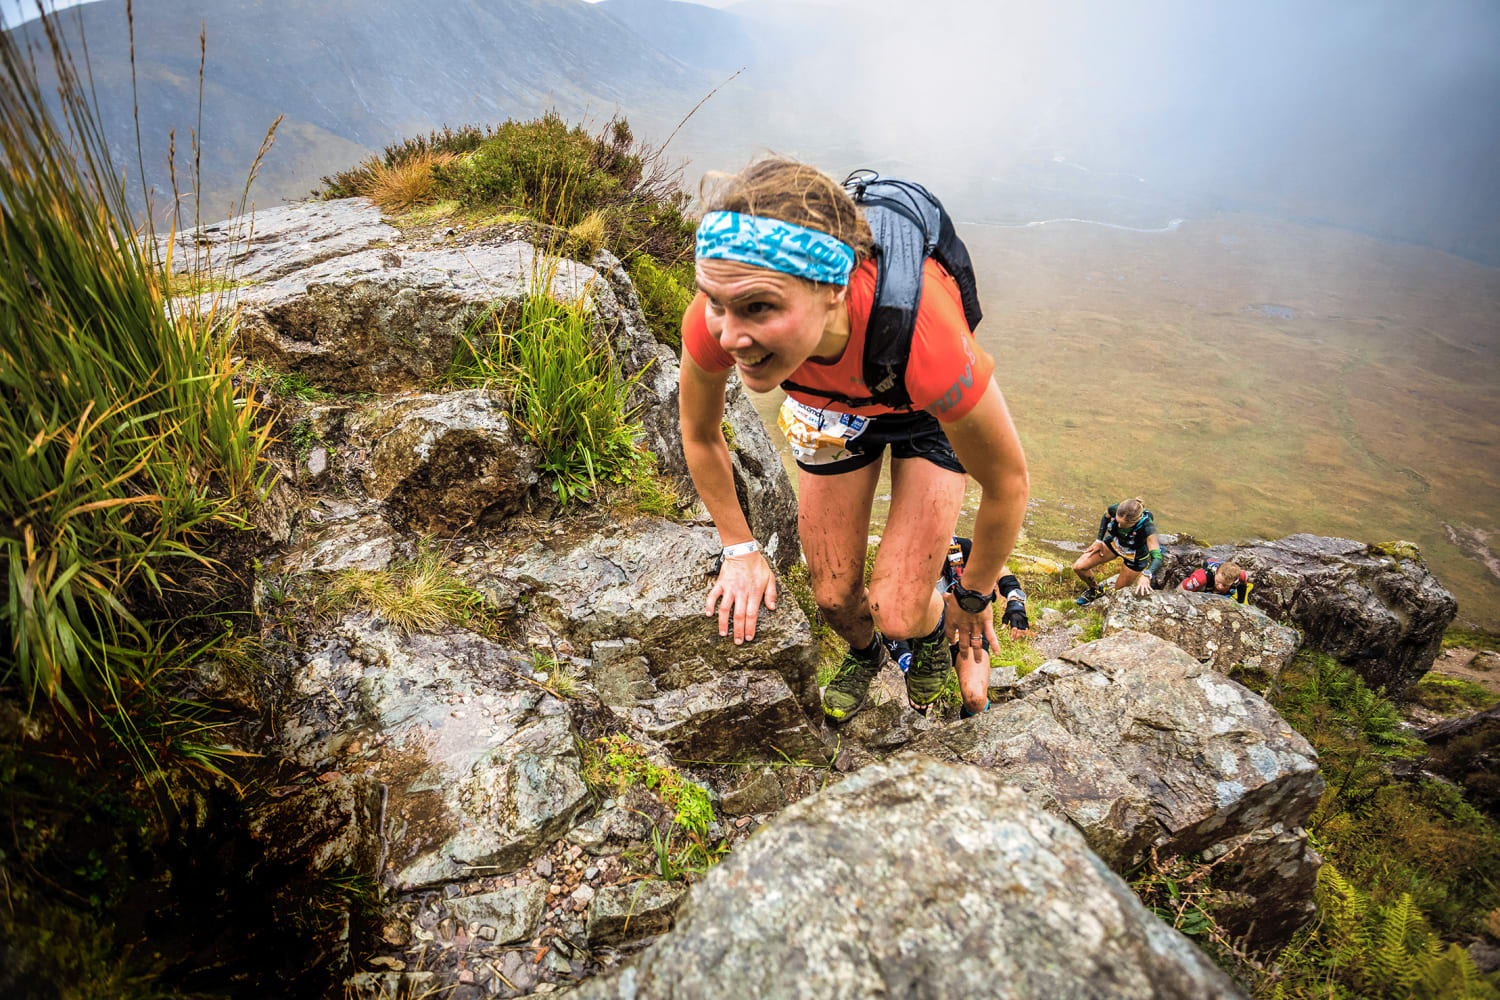 Paris: First woman to win Spine Race – interview